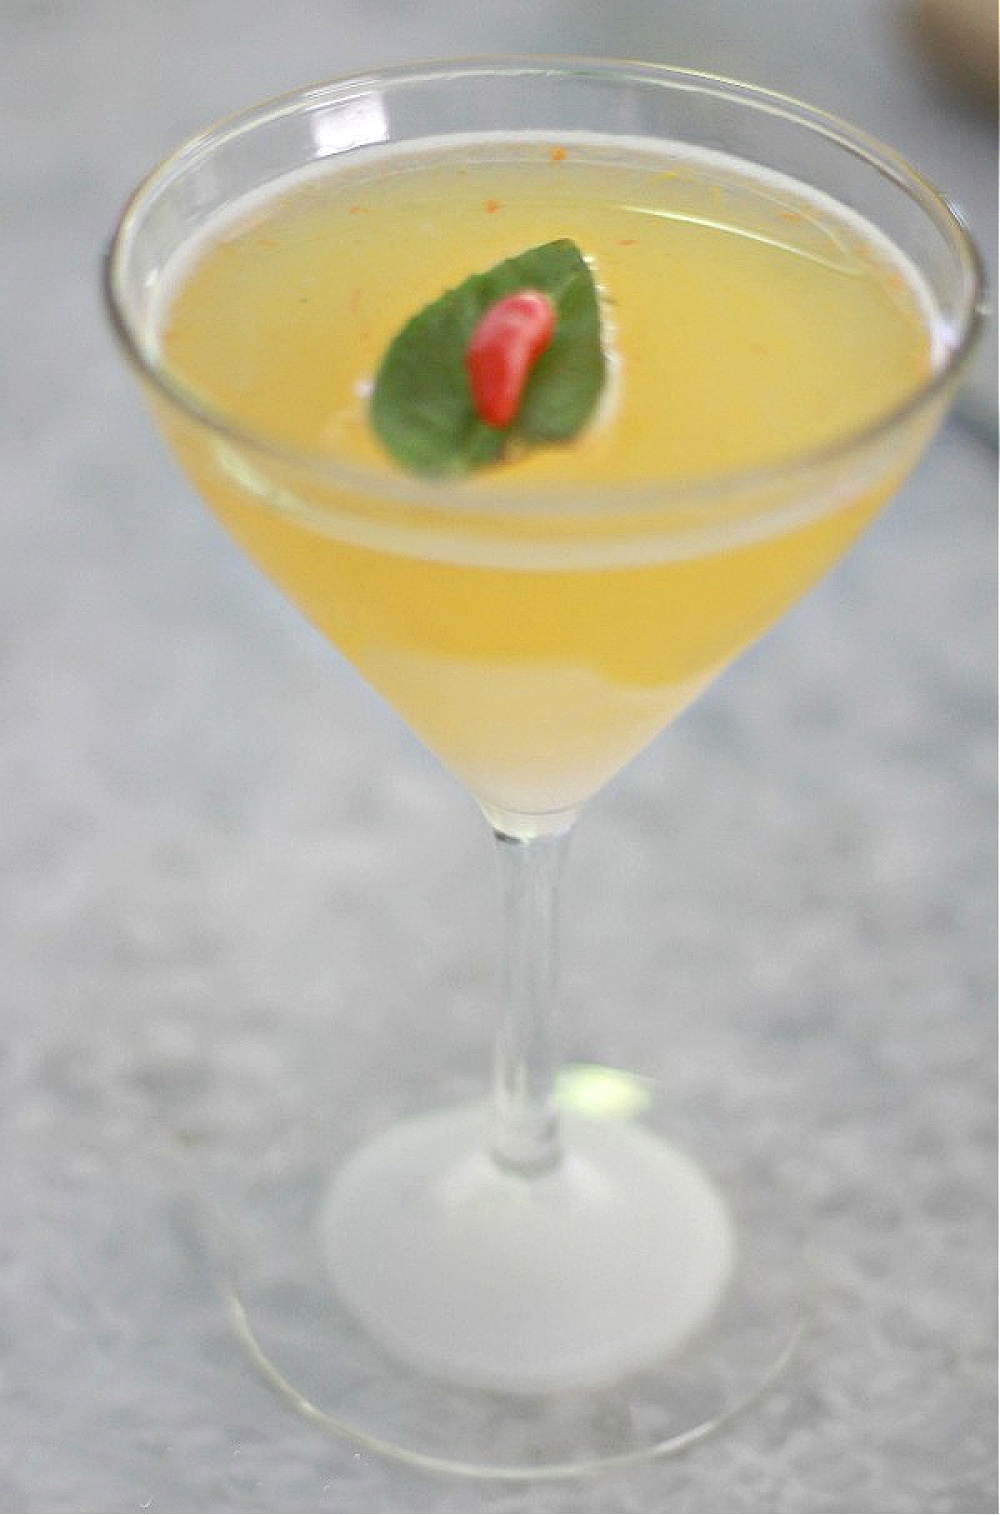 Clementina cocktail yellow with red pepper on a green basil leaf